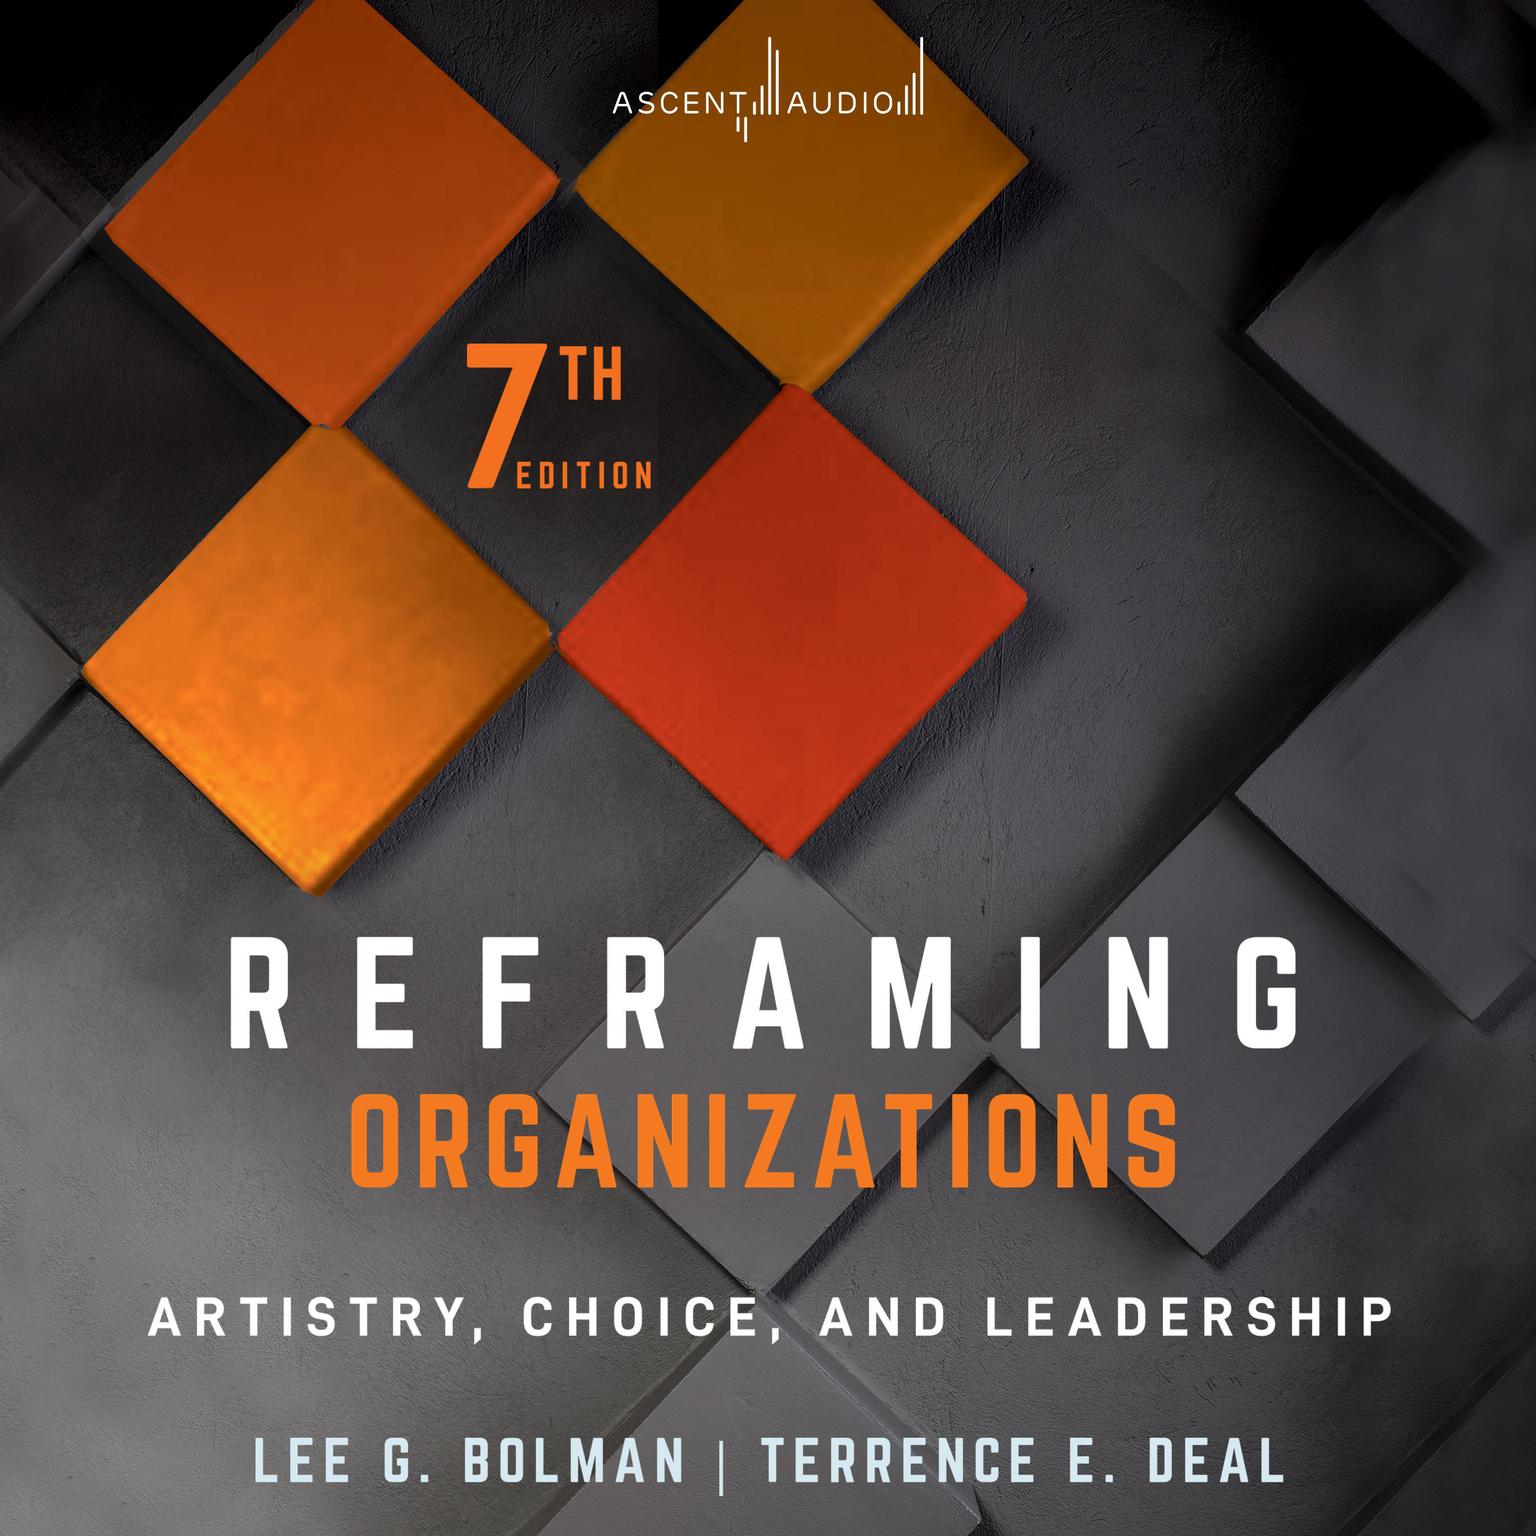 Reframing Organizations: Artistry, Choice, and Leadership, 7th Edition Audiobook, by Lee G. Bolman